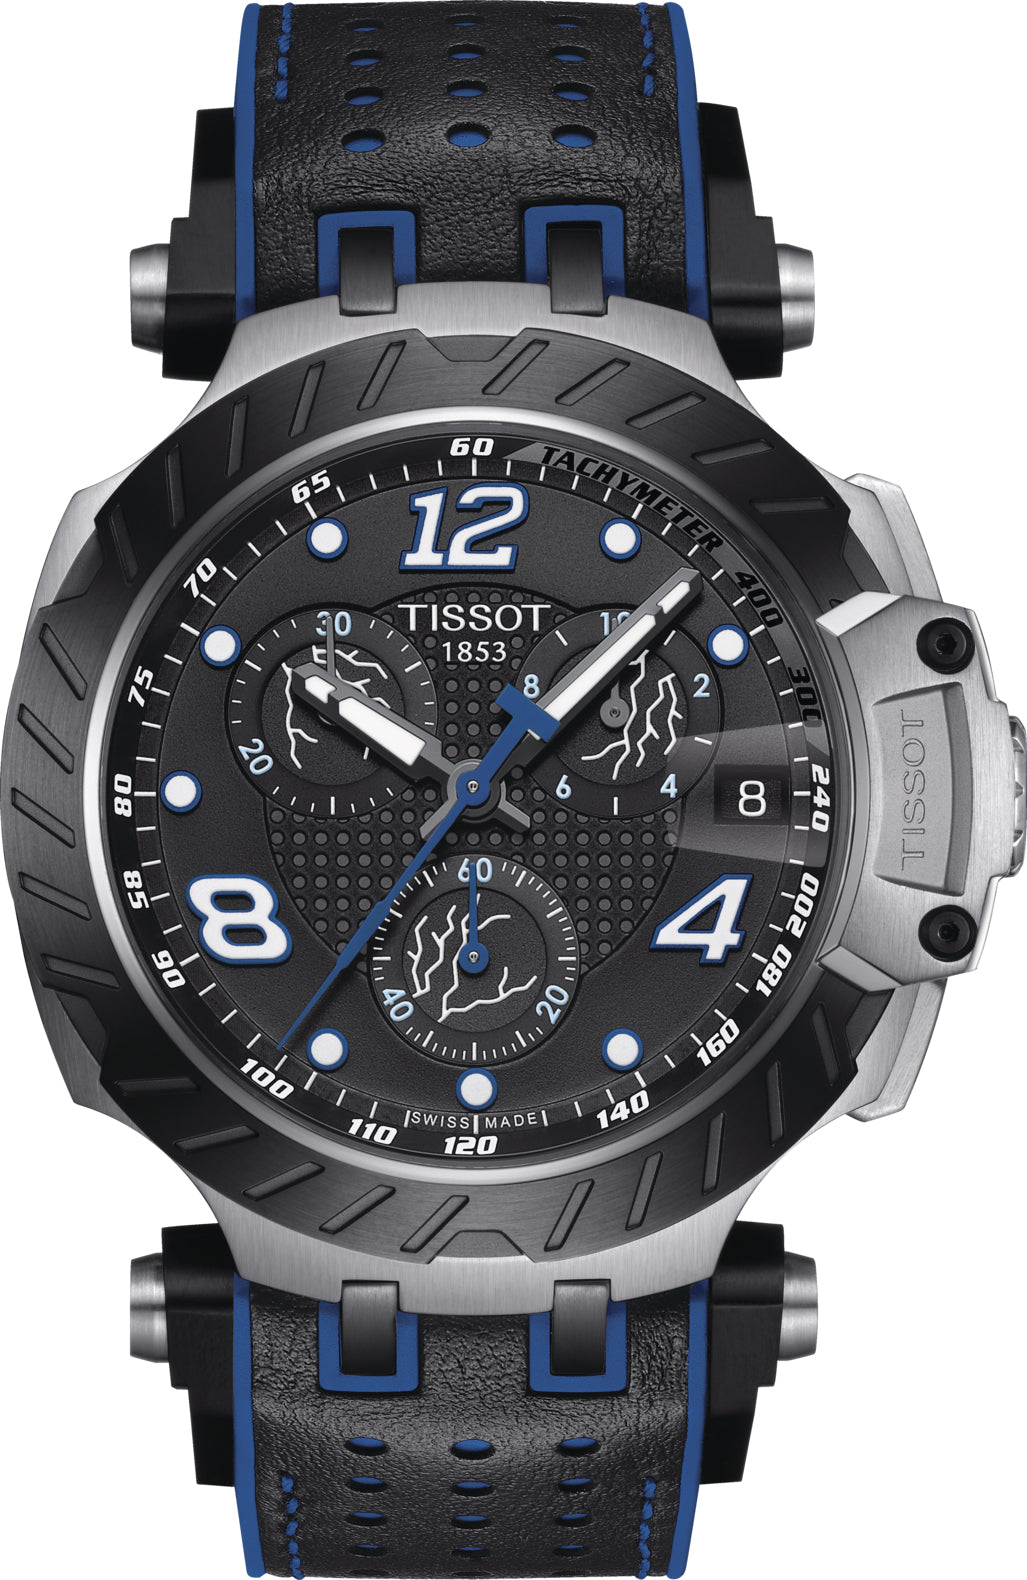 Tissot Watch T-Race MotoGP Thomas Luthi Limited Edition 2020